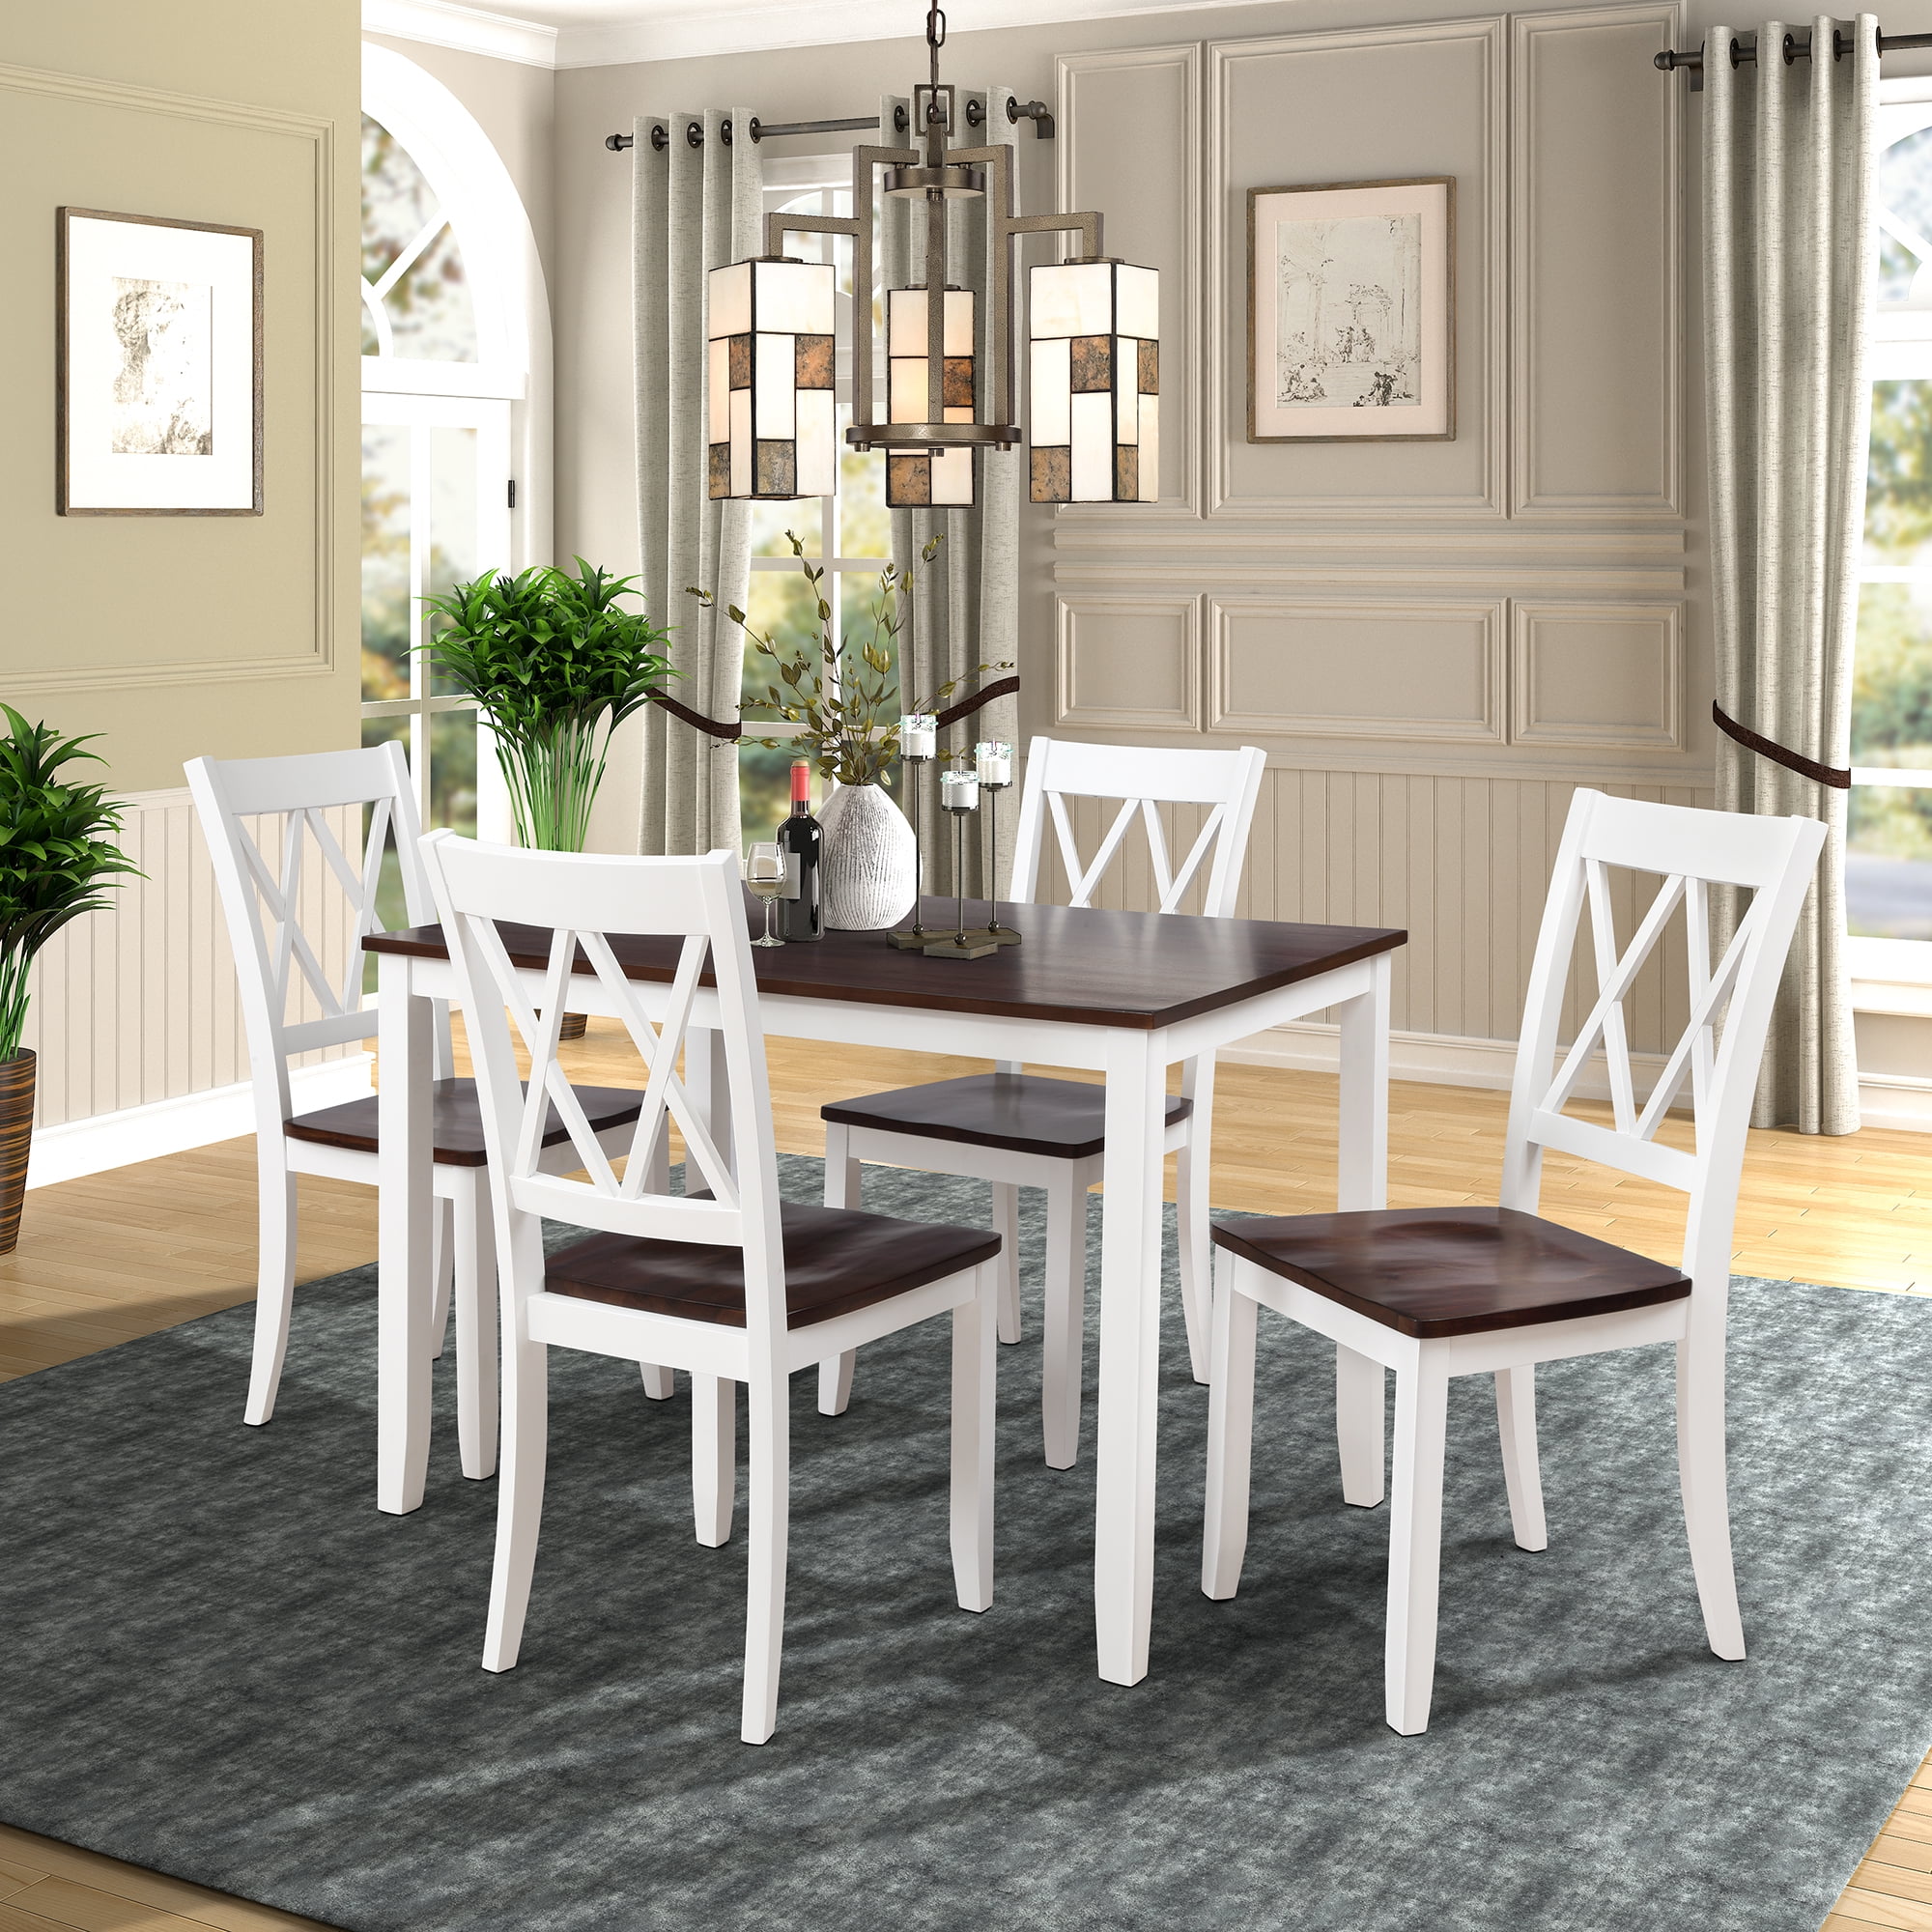 High breakfast table and chairs